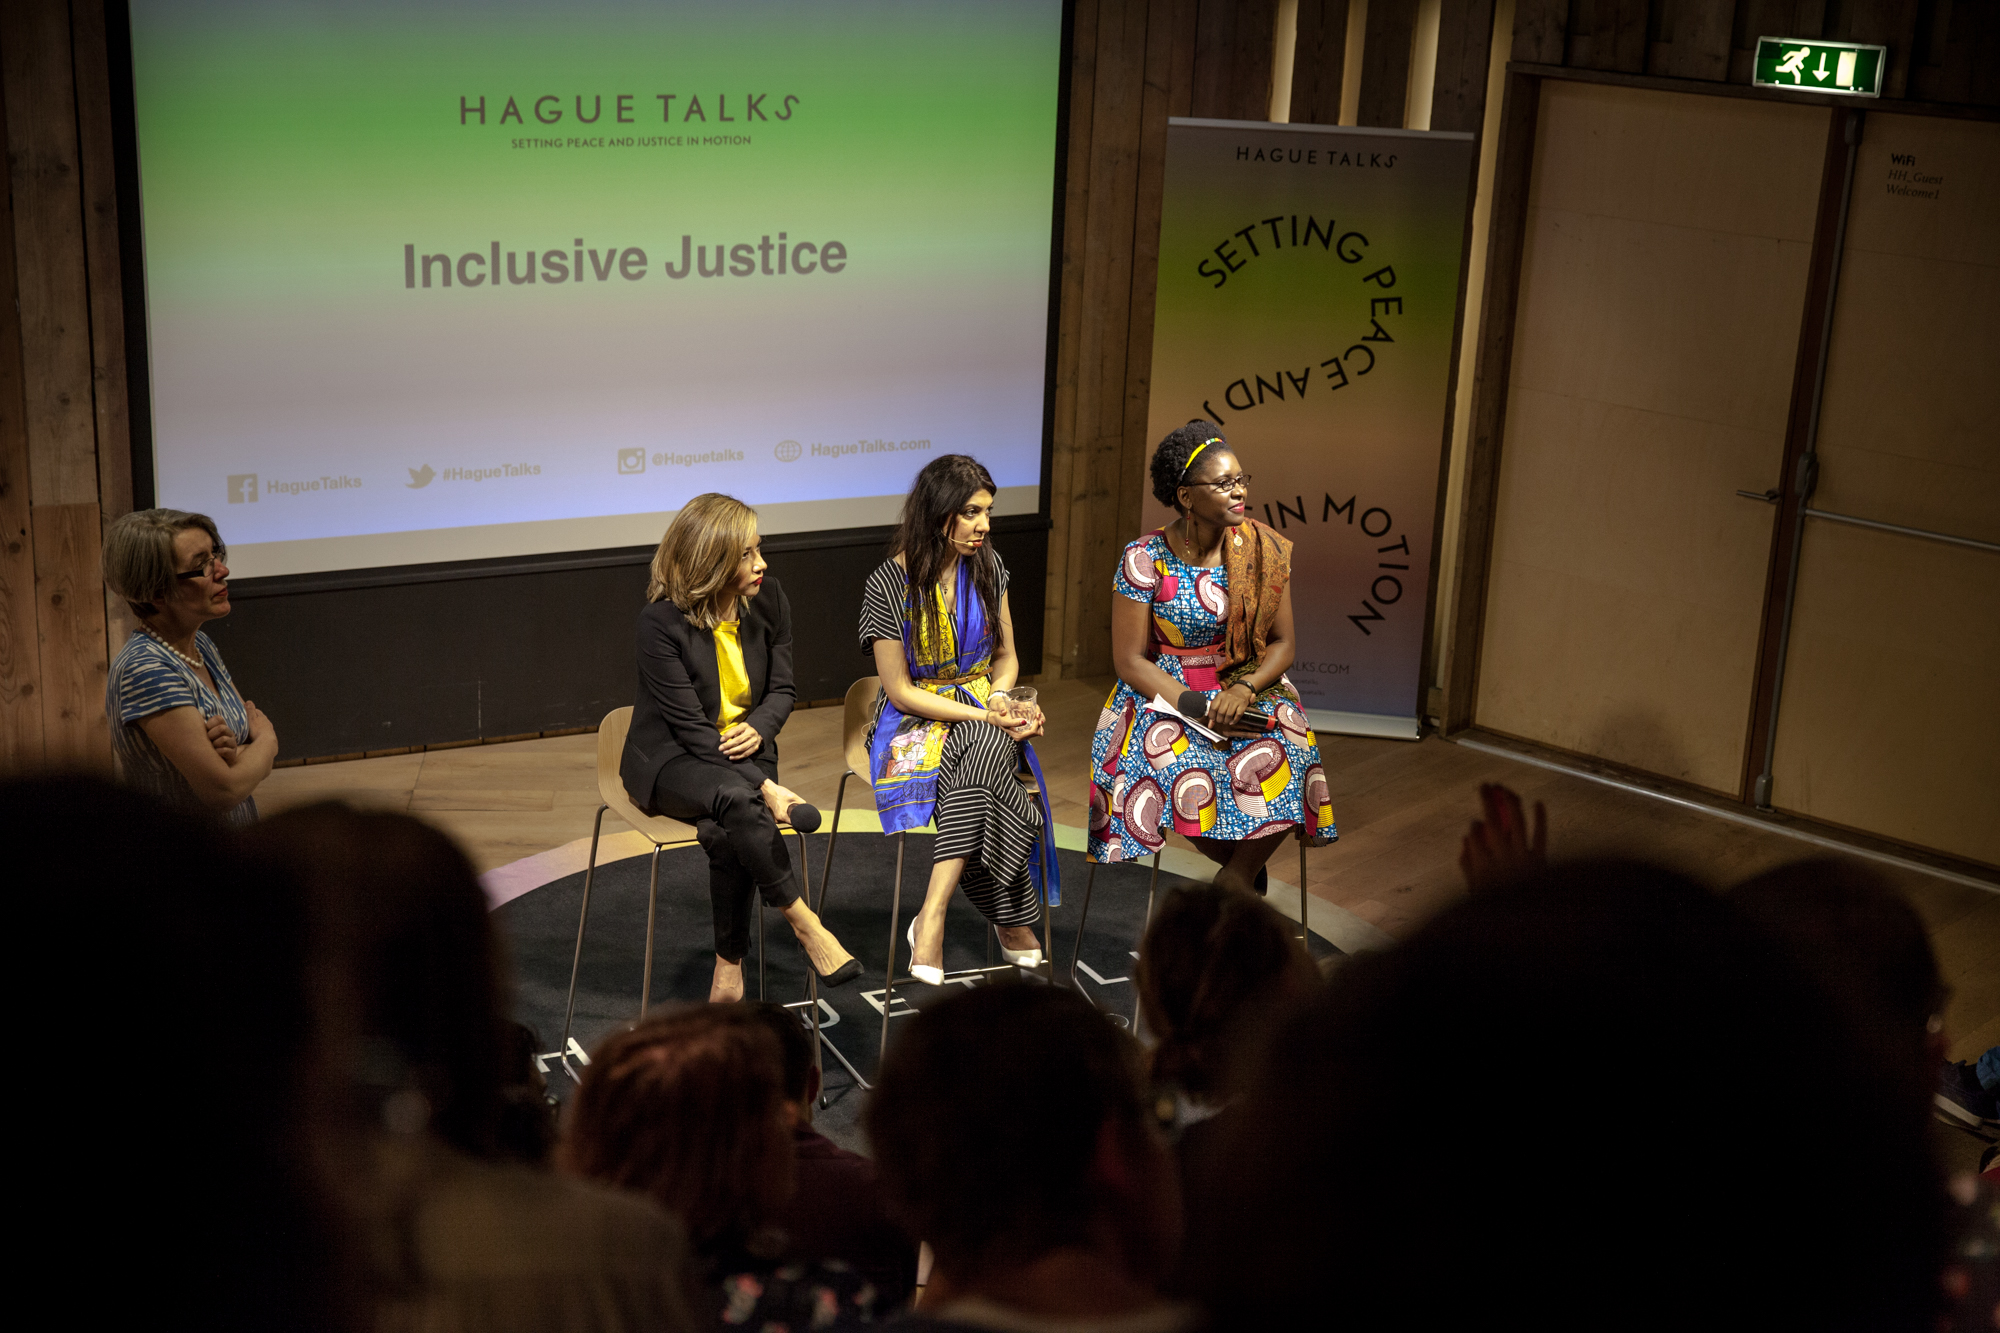 Hague Talks-inclusive justice - Humanity House